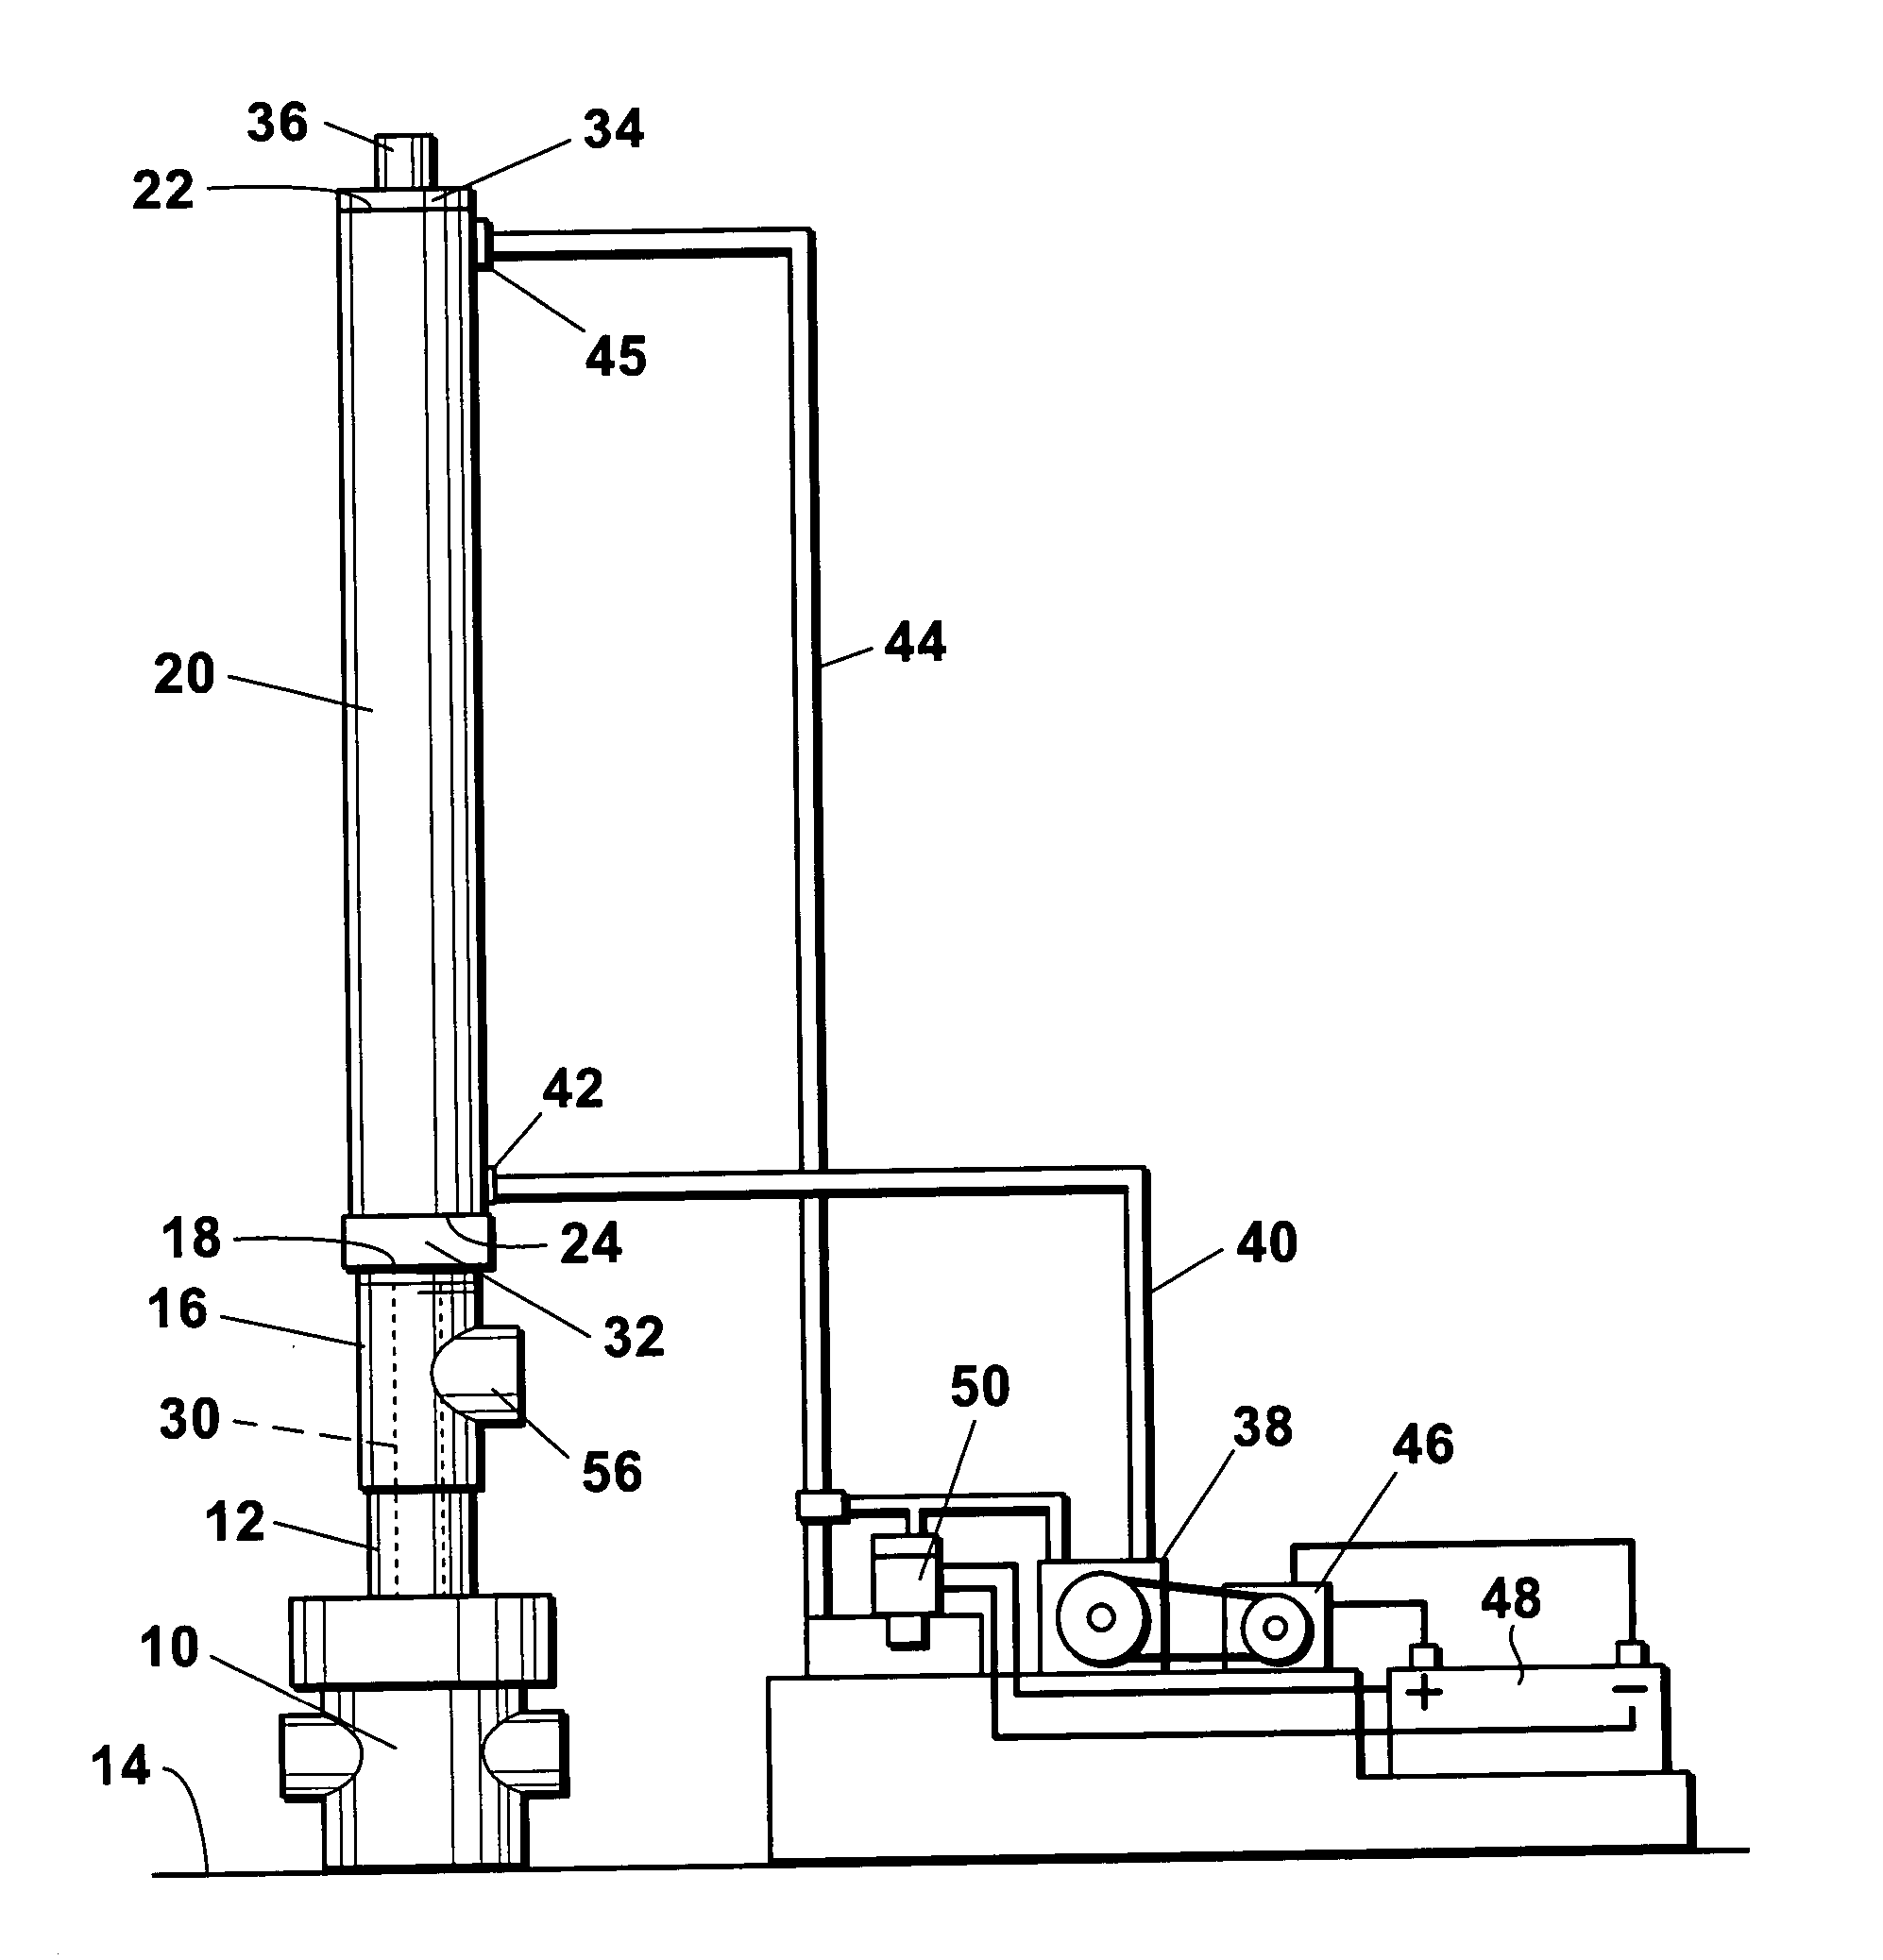 Hydraulic pump jack sytem for reciprocating oil well sucker rods